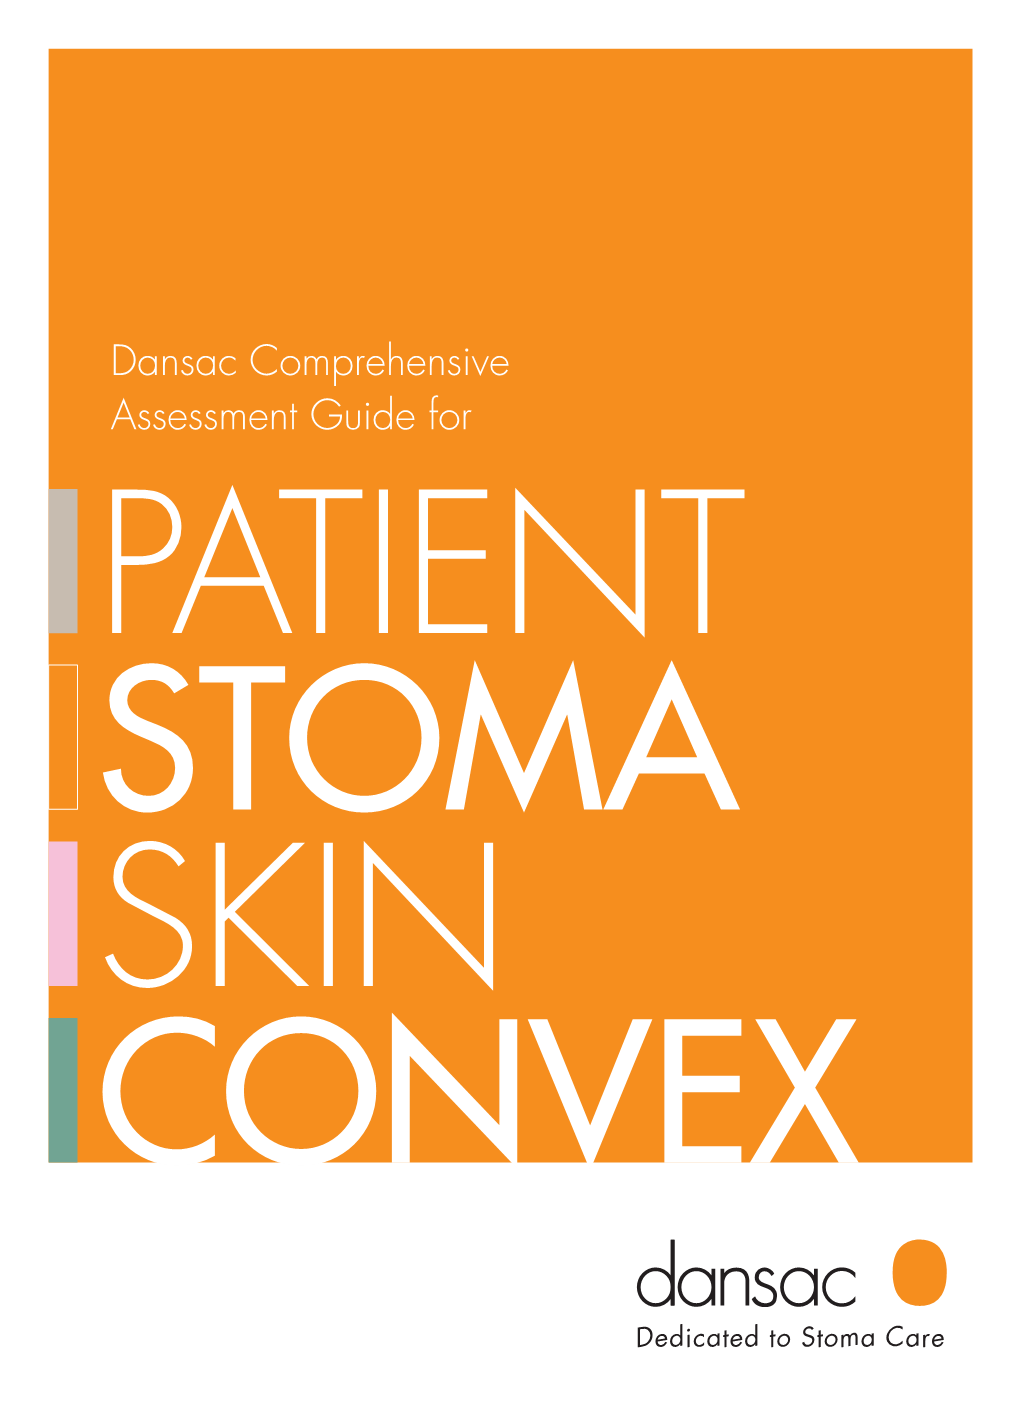 Patient Stoma Skin Convex